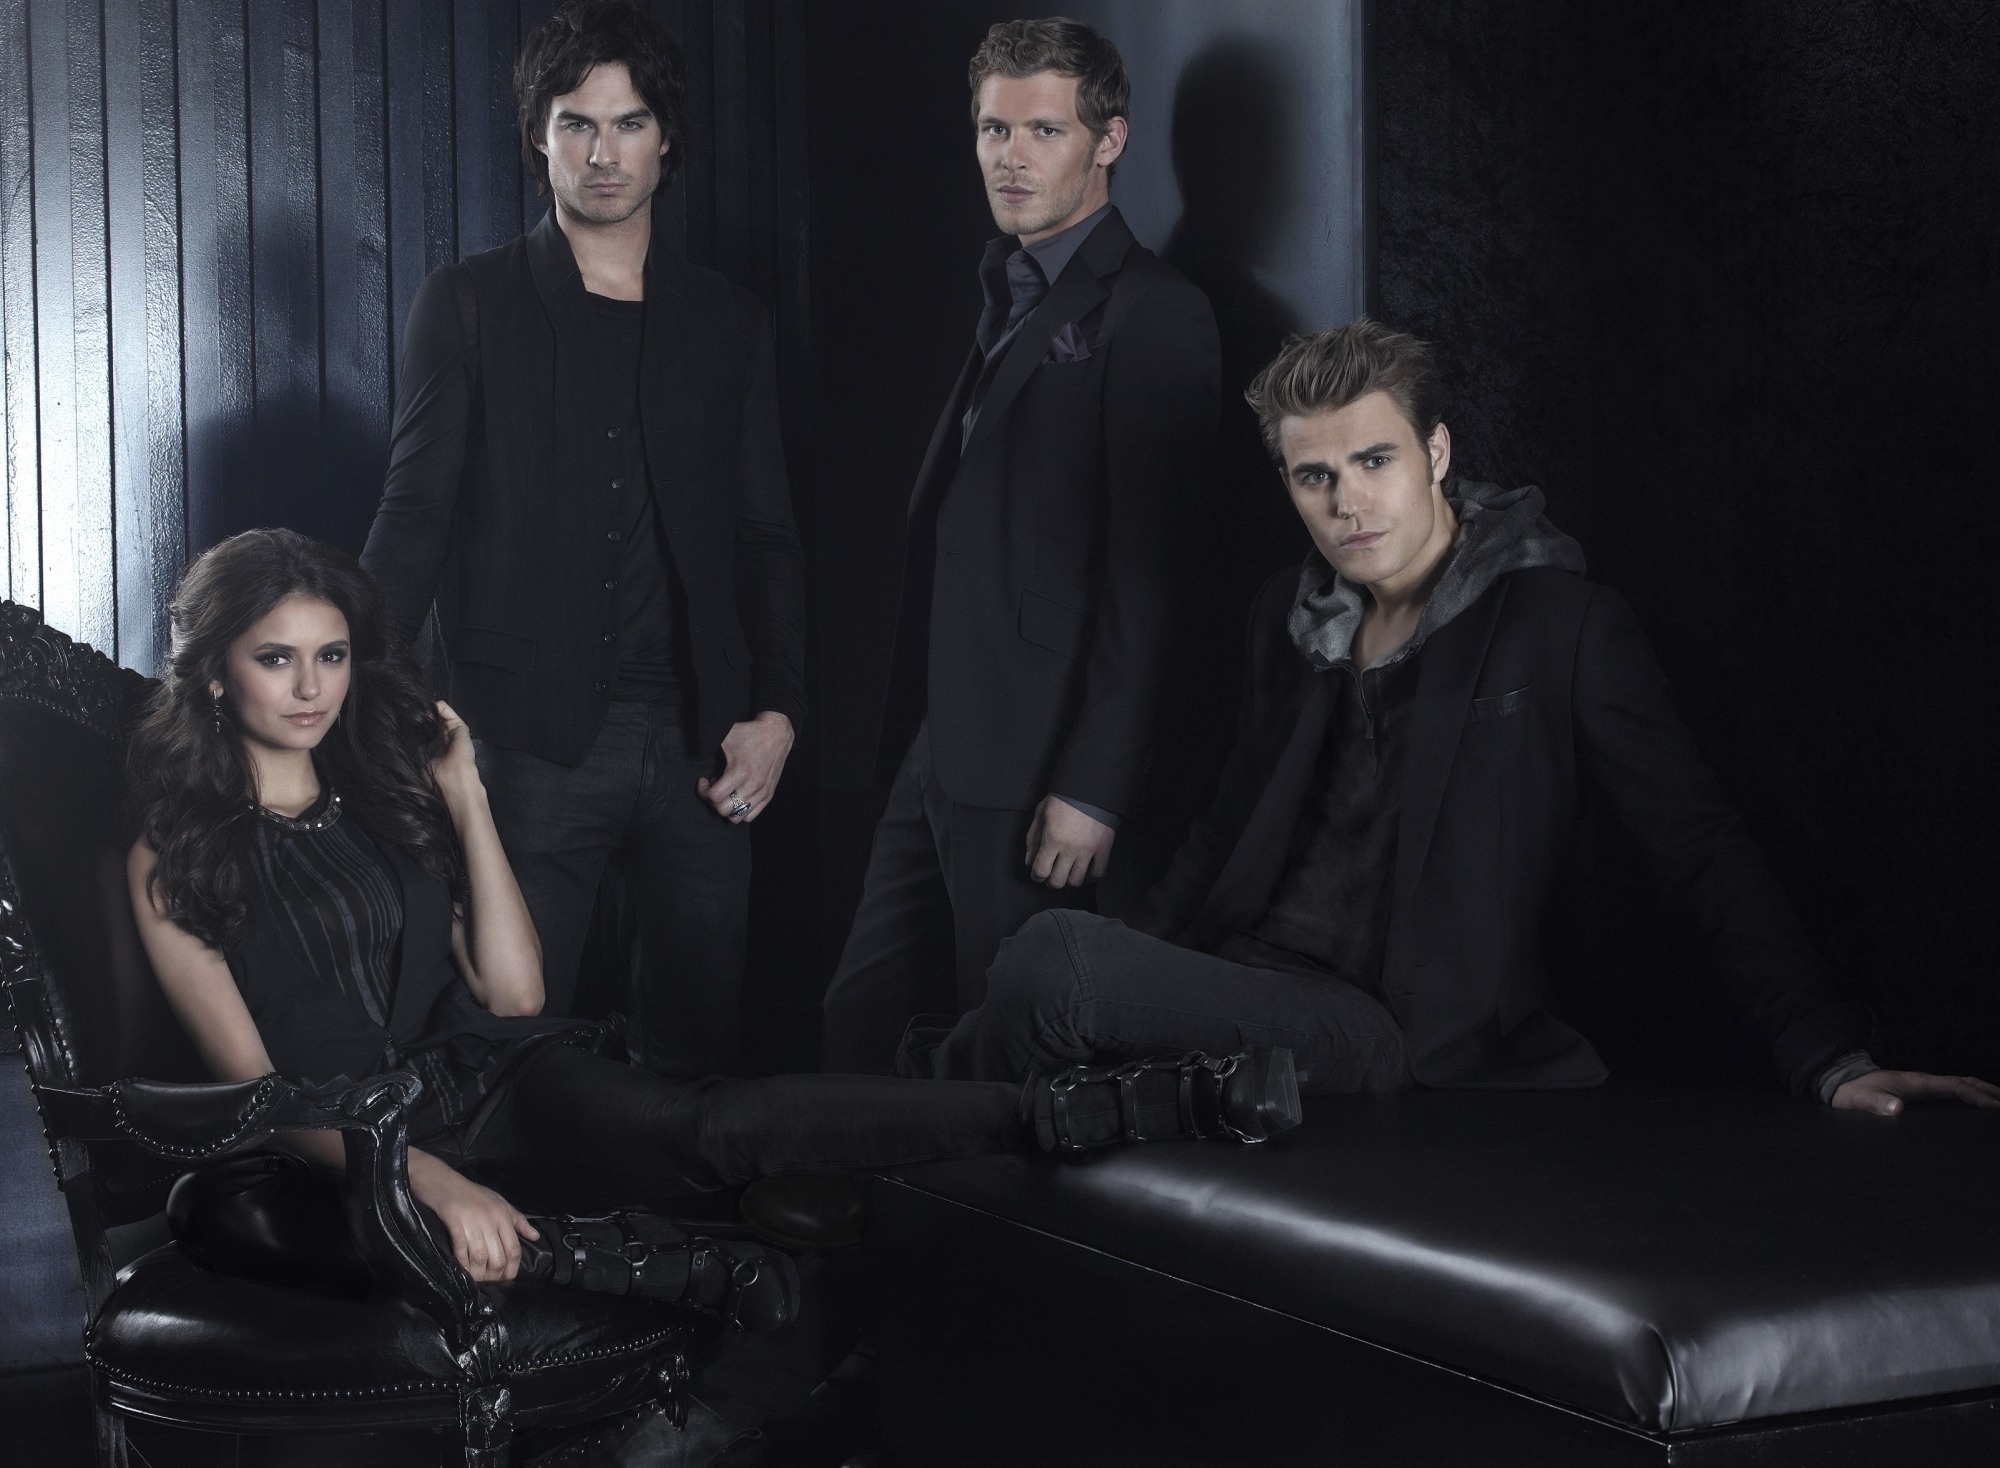 78 The Vampire Diaries HD Wallpapers Backgrounds - Wallpaper Abyss